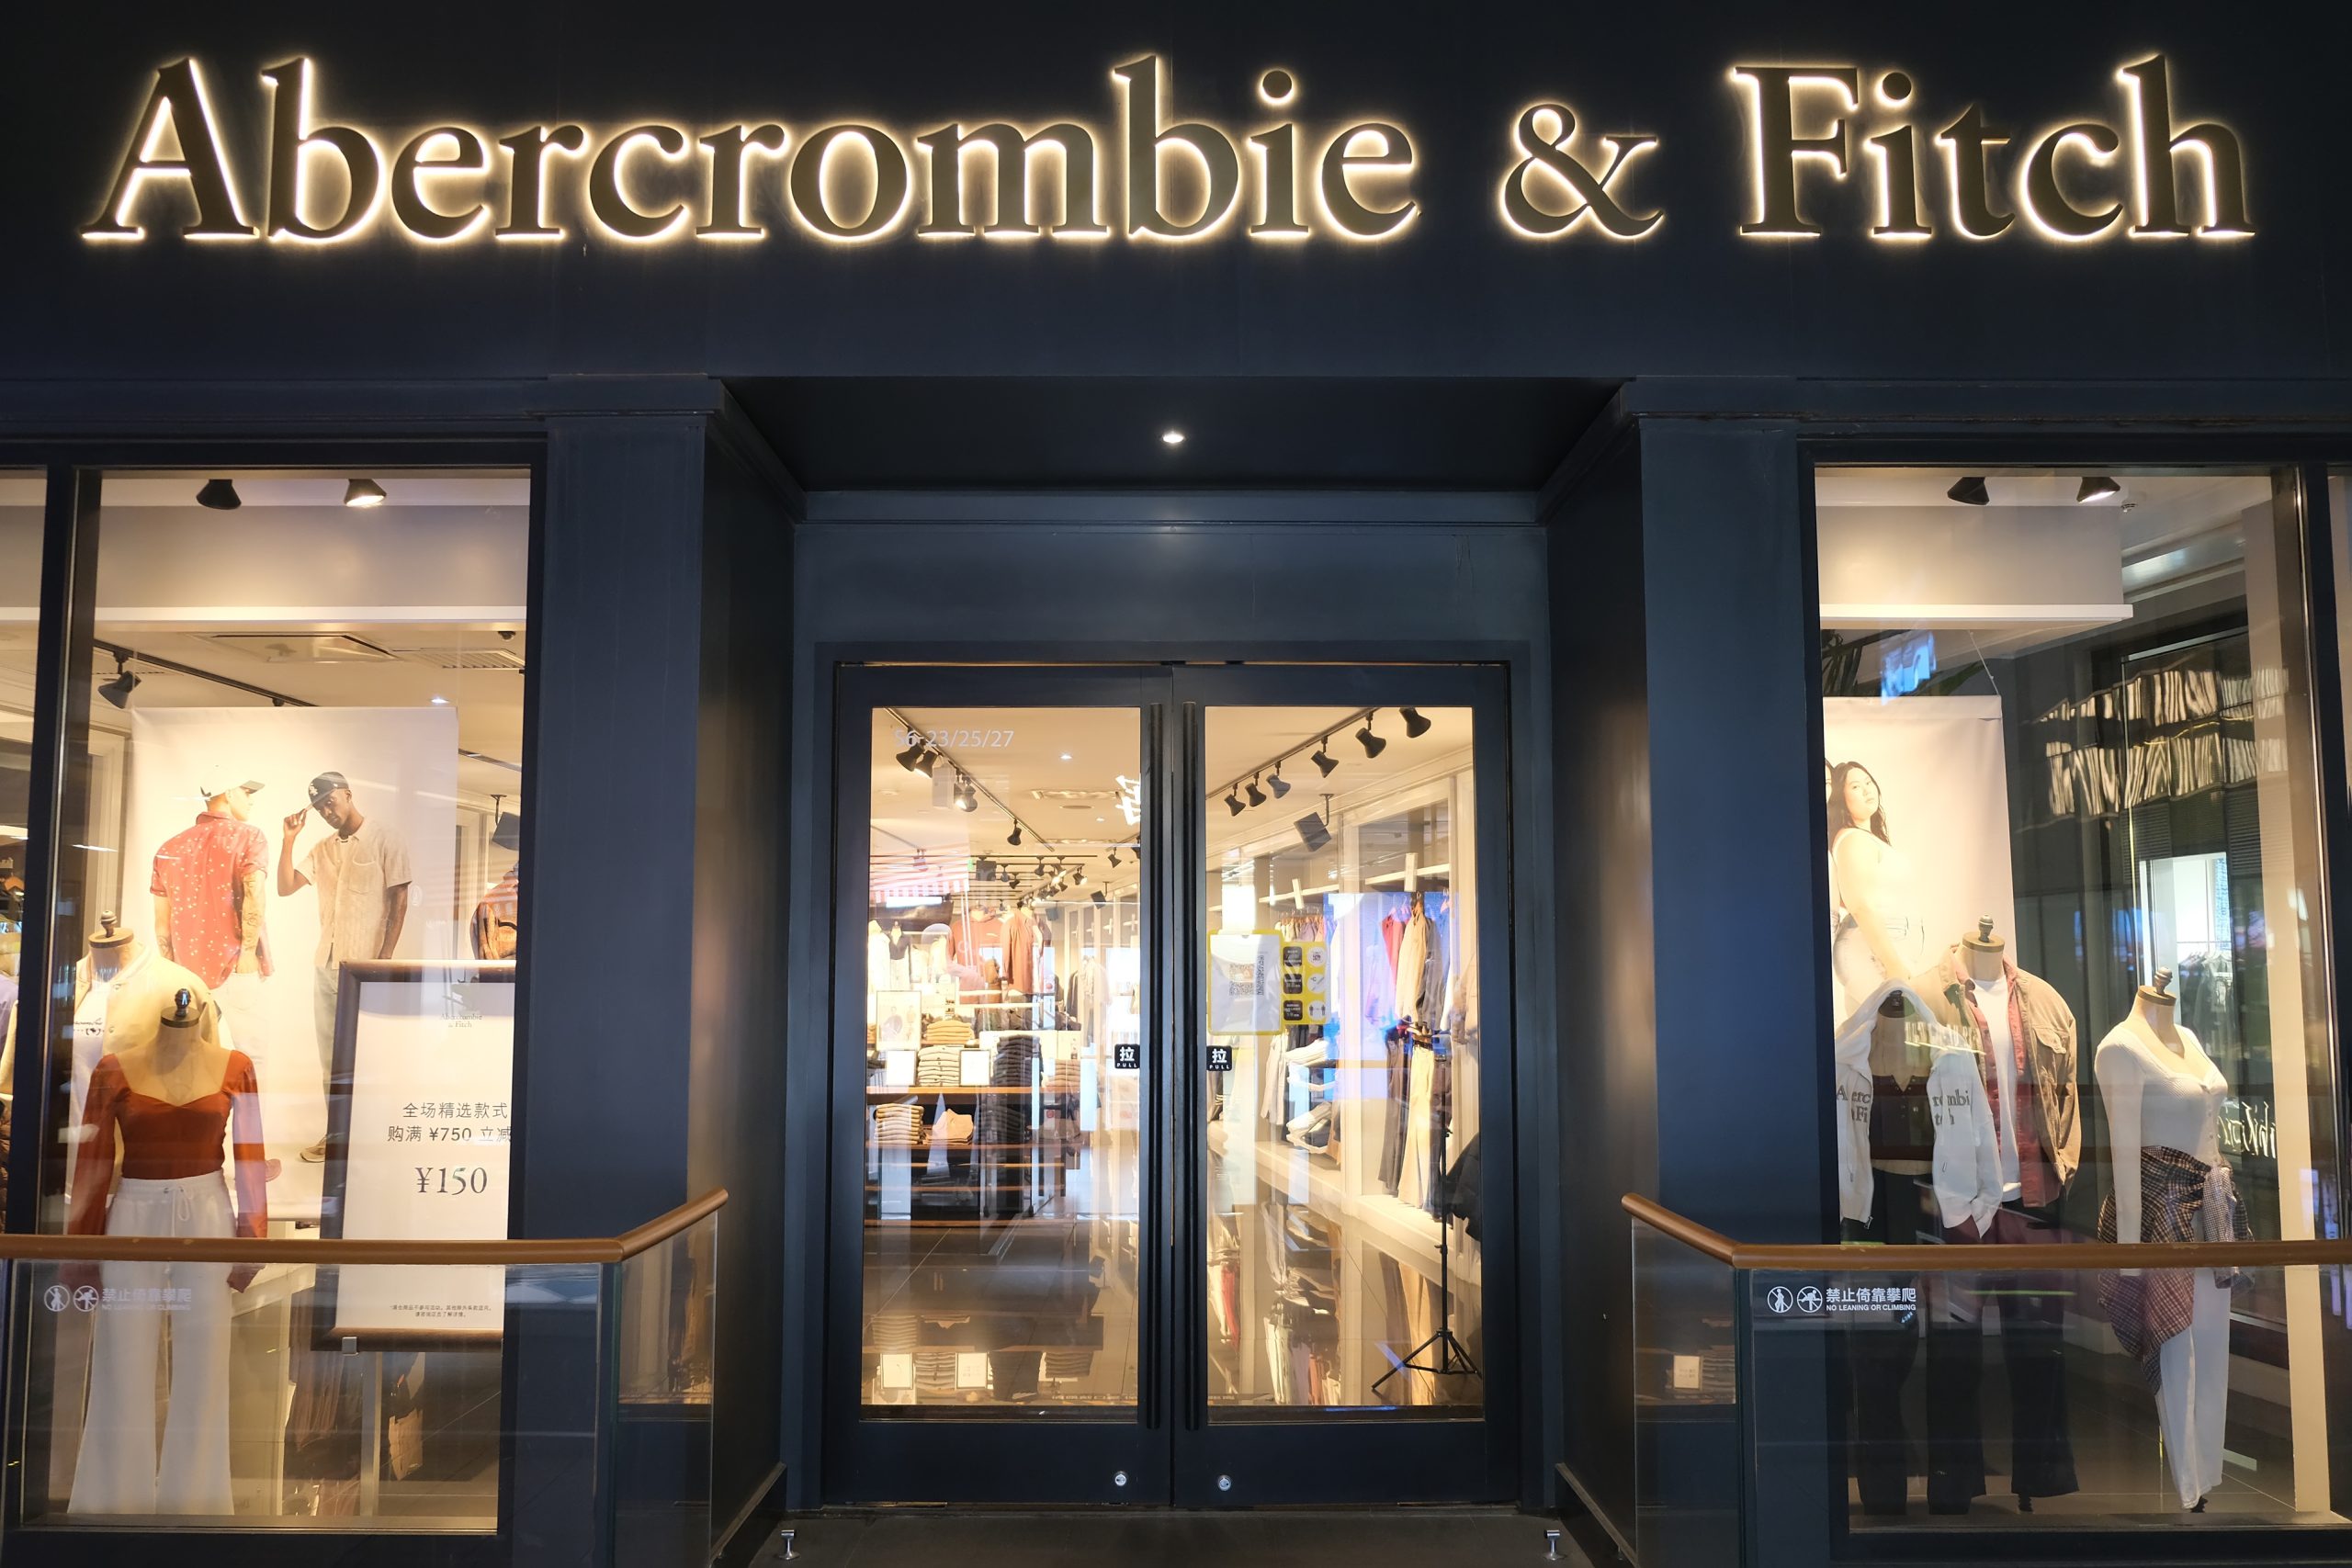 Former Abercrombie & Fitch Models File A Lawsuit Against The Company ...